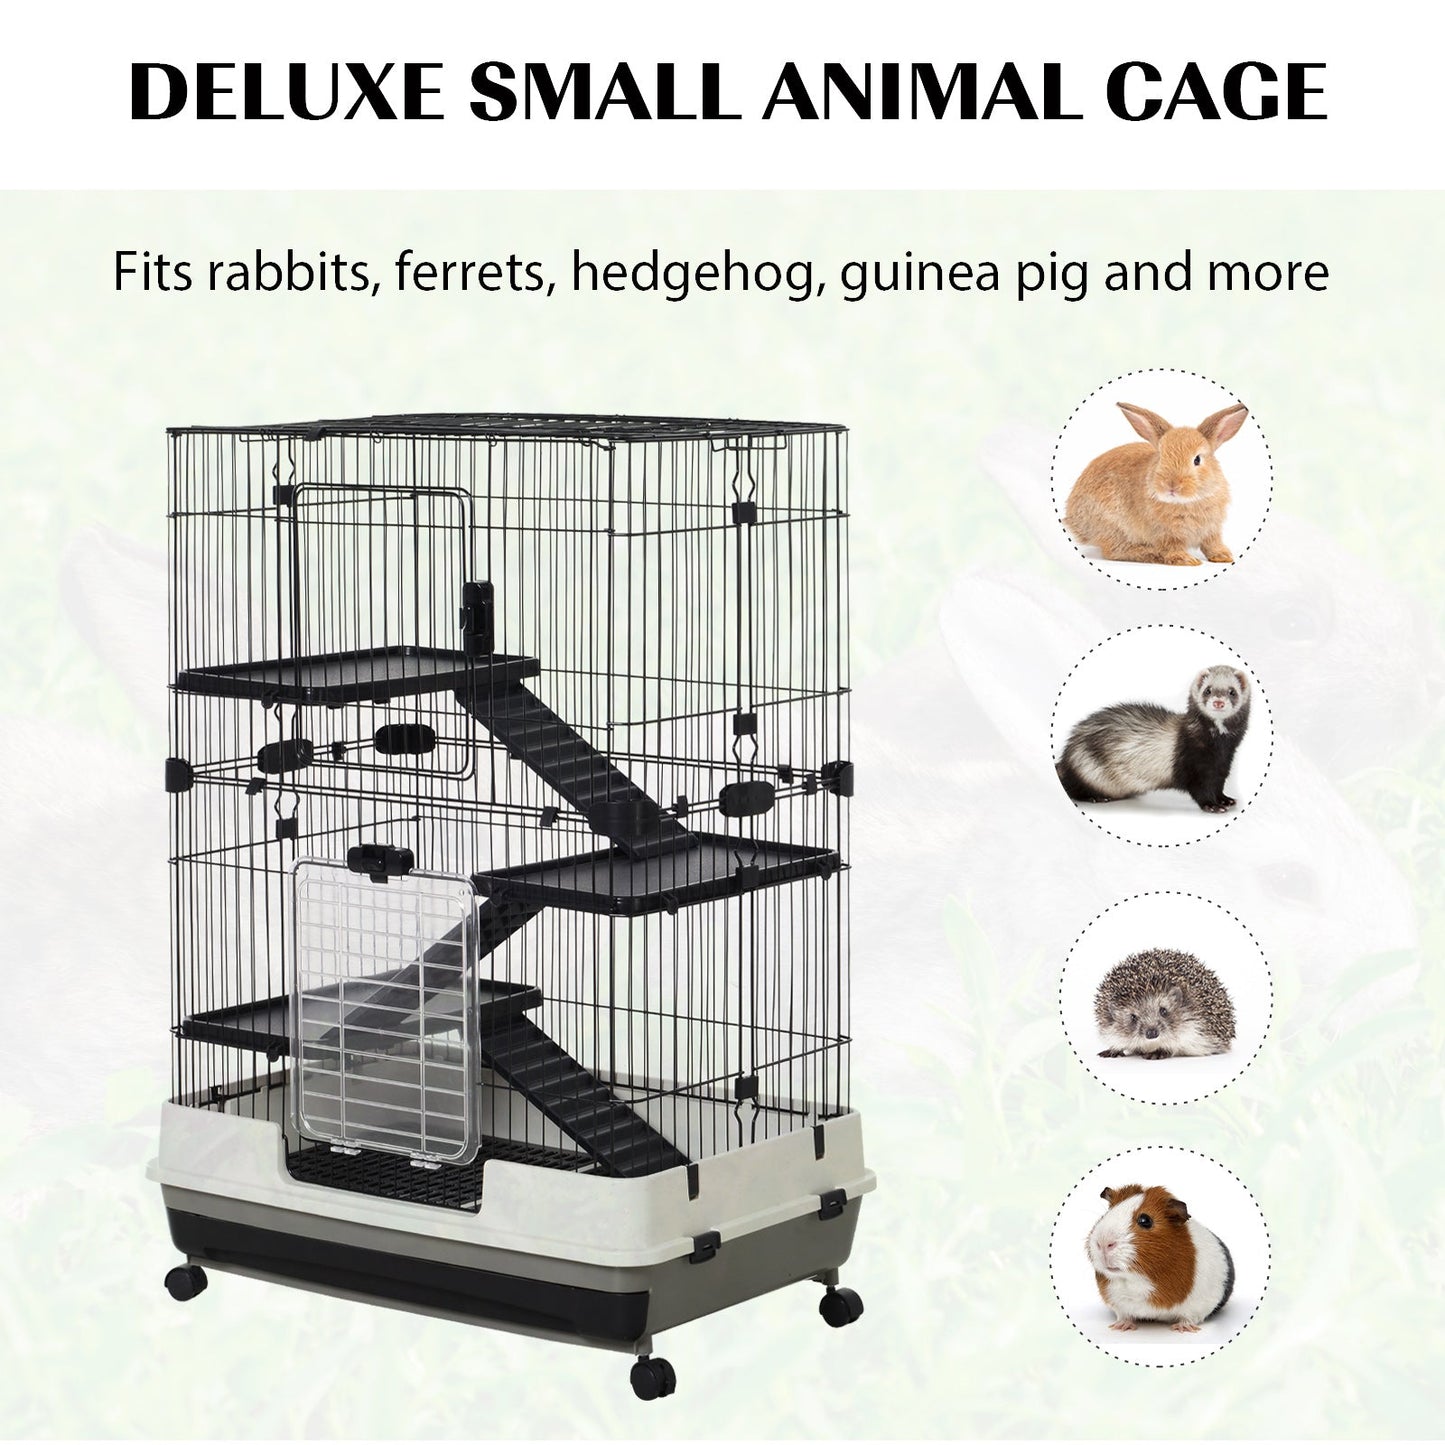 Pawhut 3 Tier Rolling Small Animal Rabbit Cage Chinchillas Hutch Pet Play House with Platform Ramp Removable Tray 81.2 x 52.7 x 110 cm